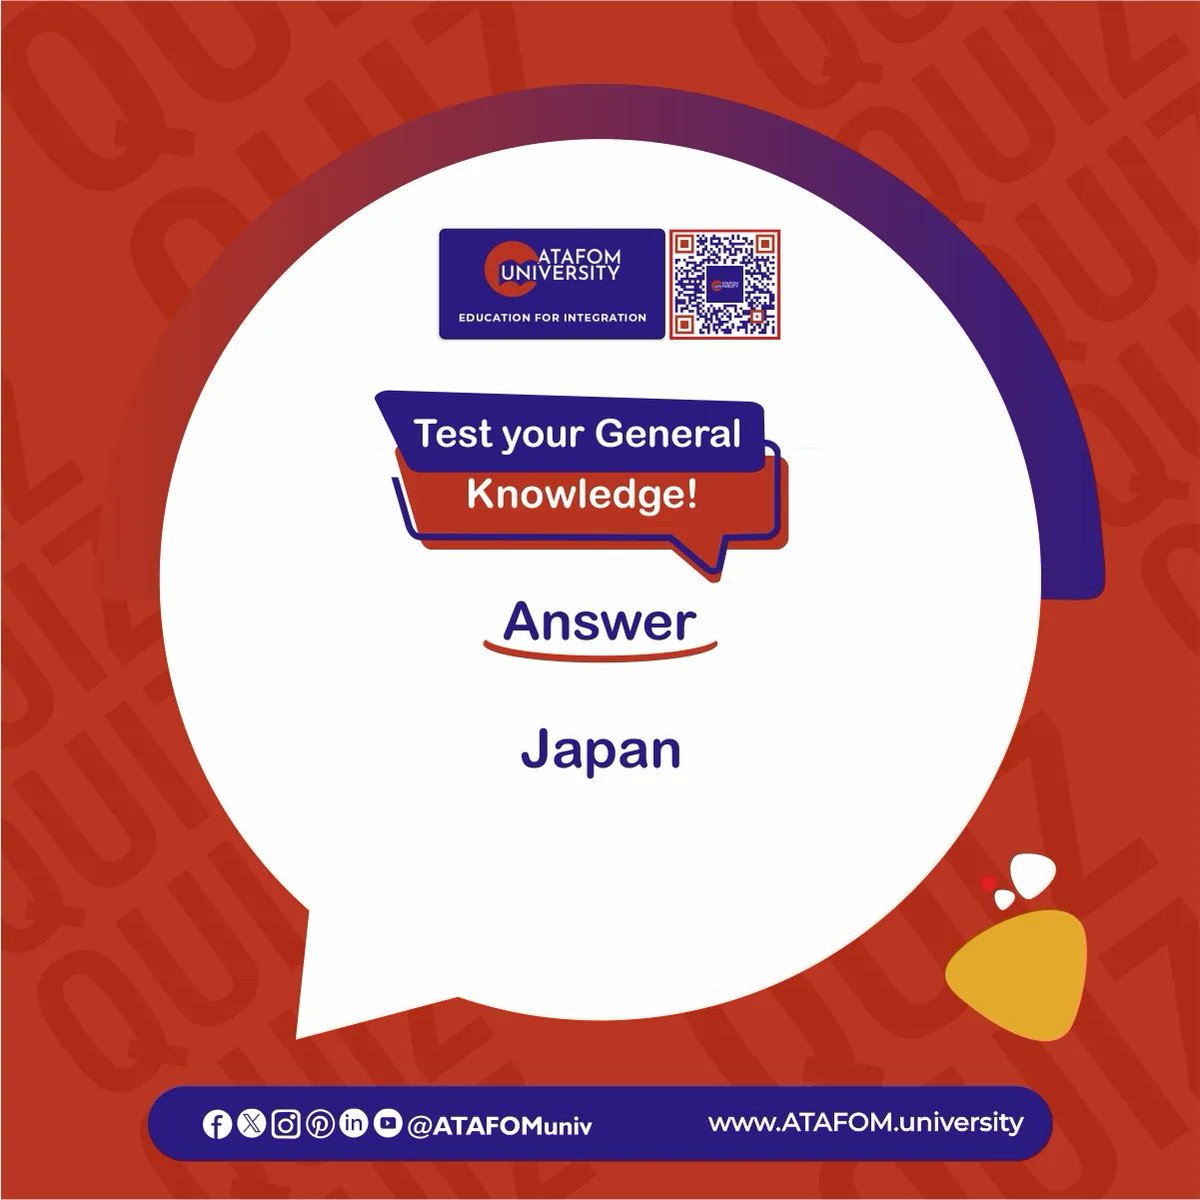 Test your General Knowledge! 🤔🧠

▶️ Which of the following countries is smallest in size?
• Ireland
• Japan
• Argentina
• Egypt 

Answer - Japan ✅

Visit Our Website: ATAFOM.university

#ATAFOM
#ATAFOMuniversity
#SakirYavuz
#QuizChallenge
#quizinstagram…